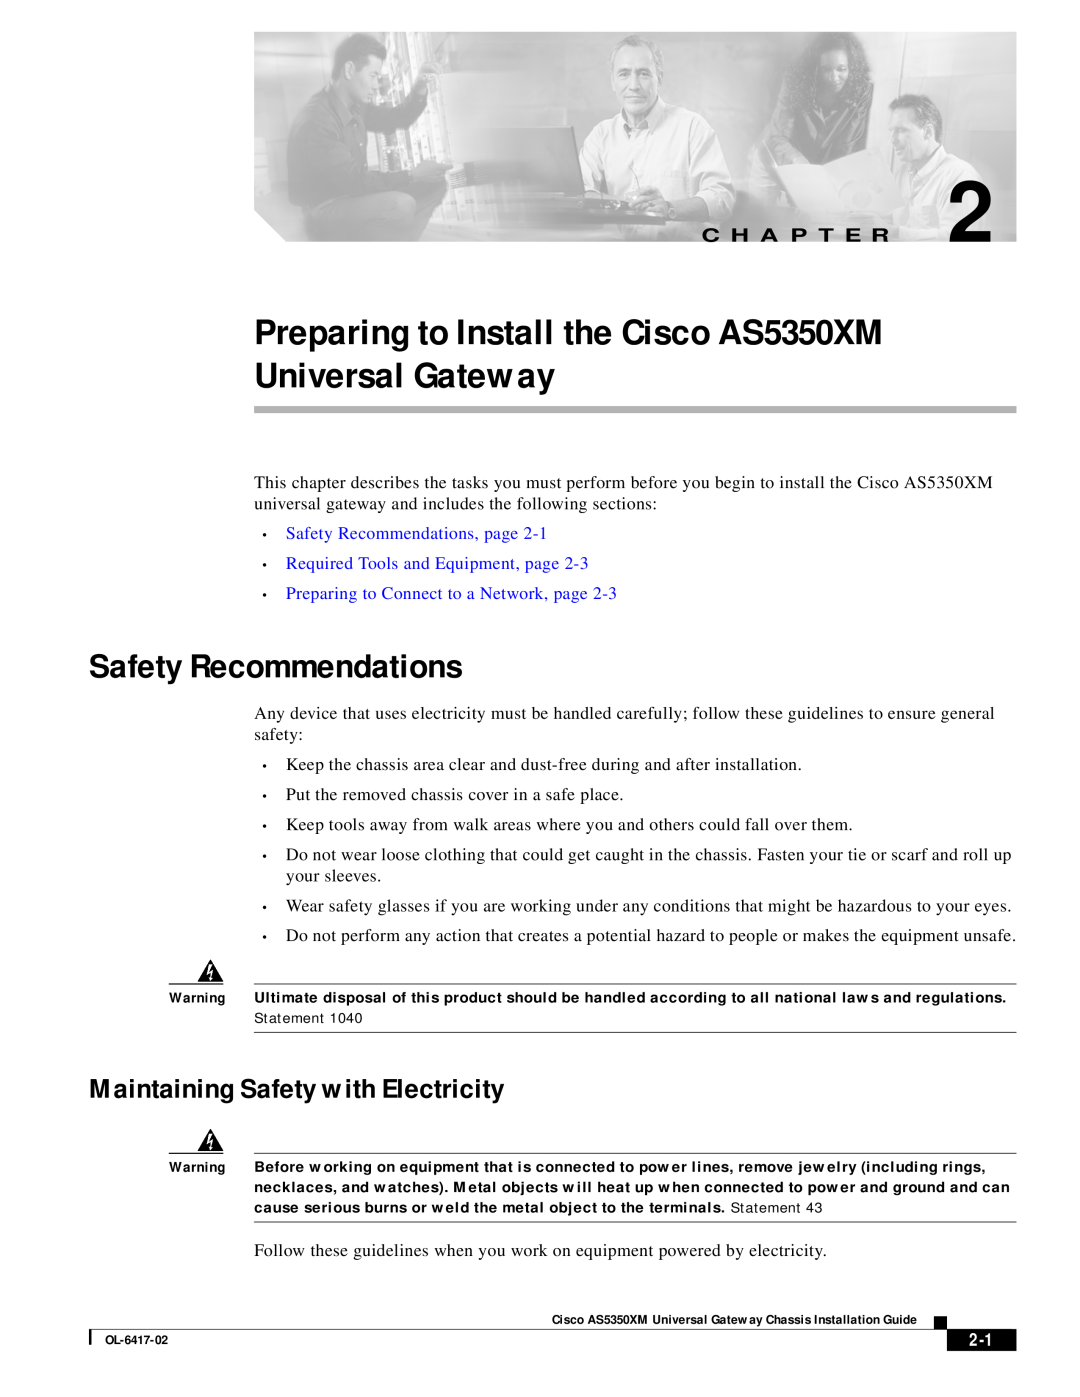 Cisco Systems AS5350XM manual Safety Recommendations, Maintaining Safety with Electricity, C H A P T E R 